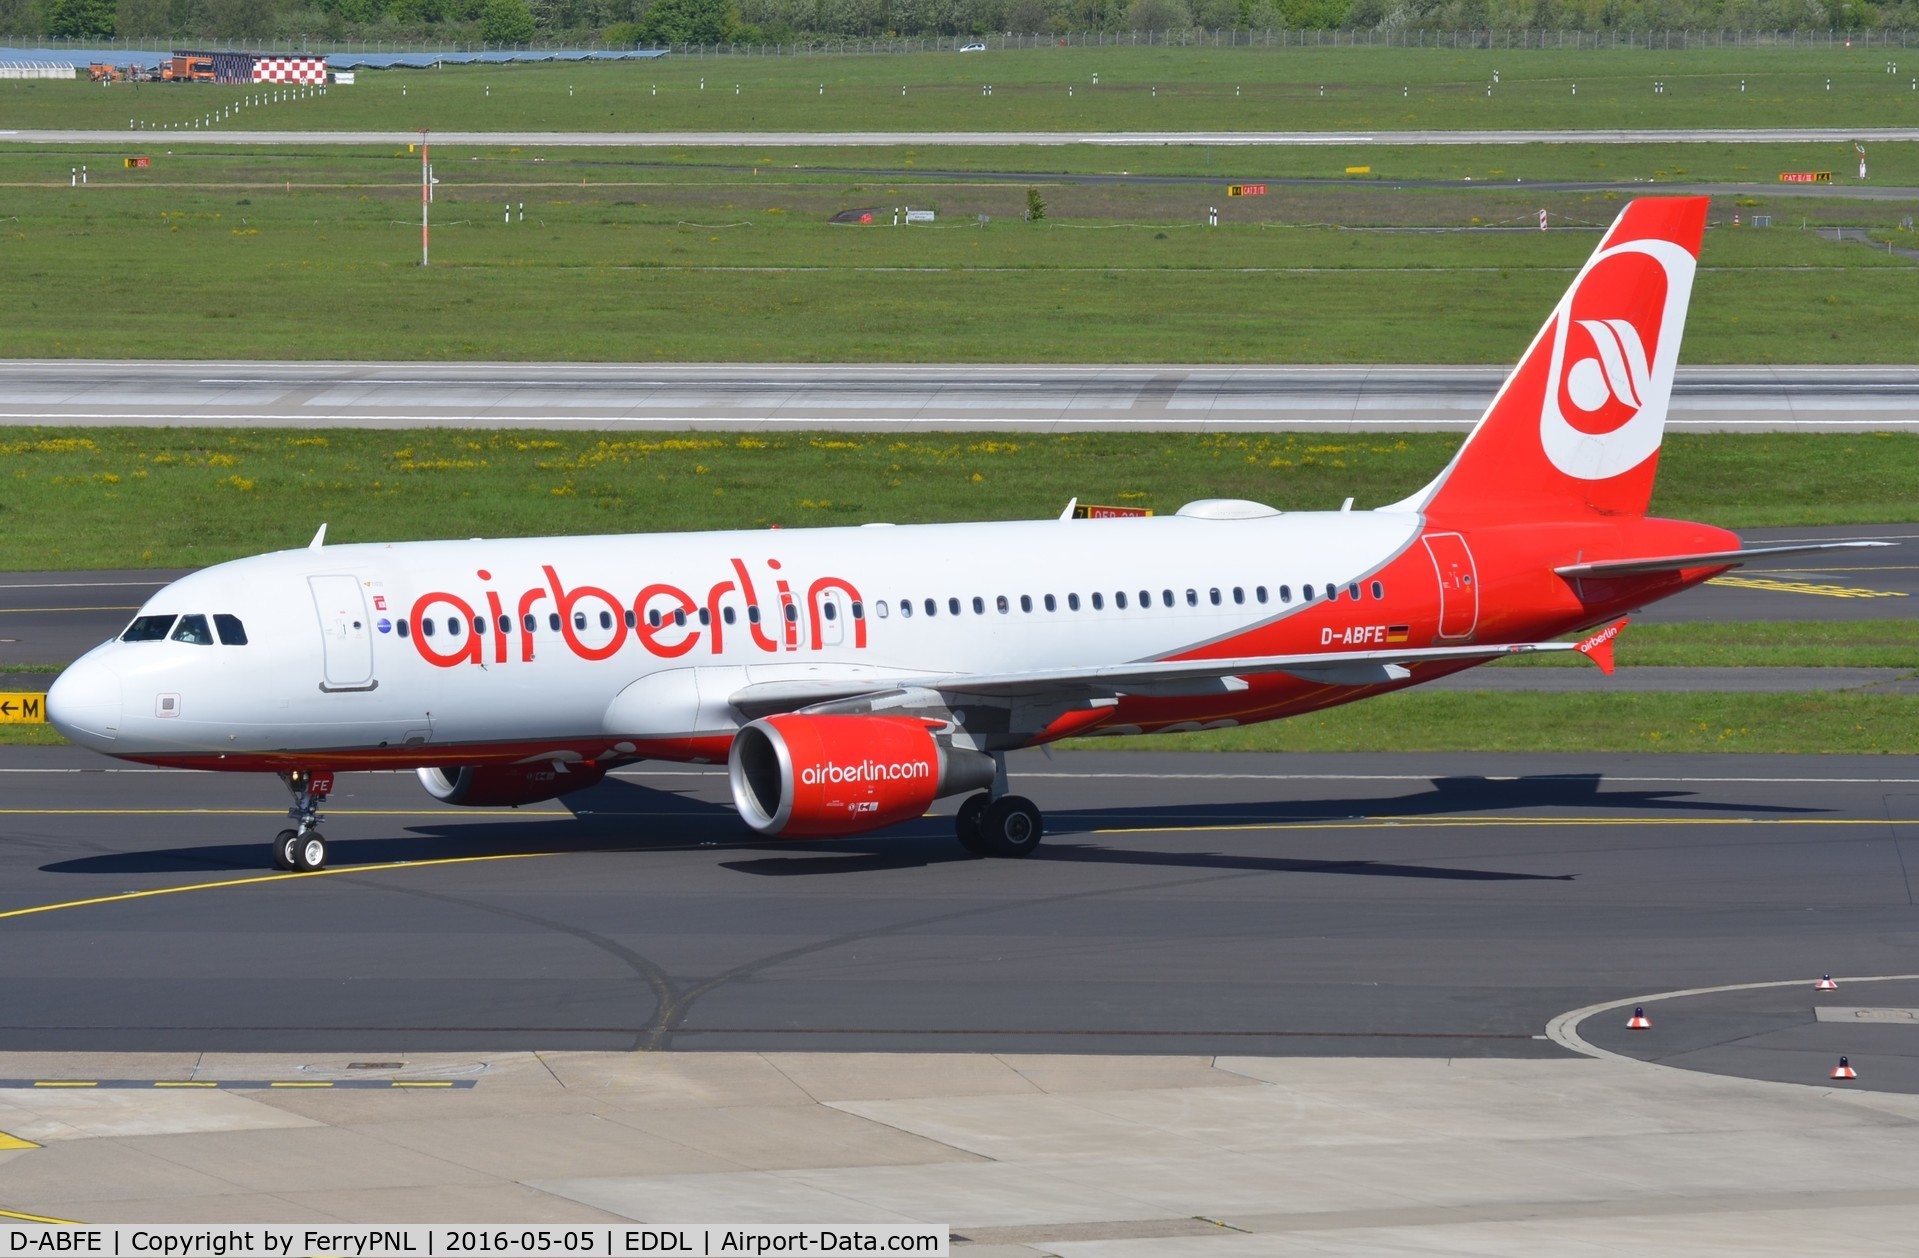 D-ABFE, 2010 Airbus A320-214 C/N 4269, Air Berlin A320 arrived in DUS.